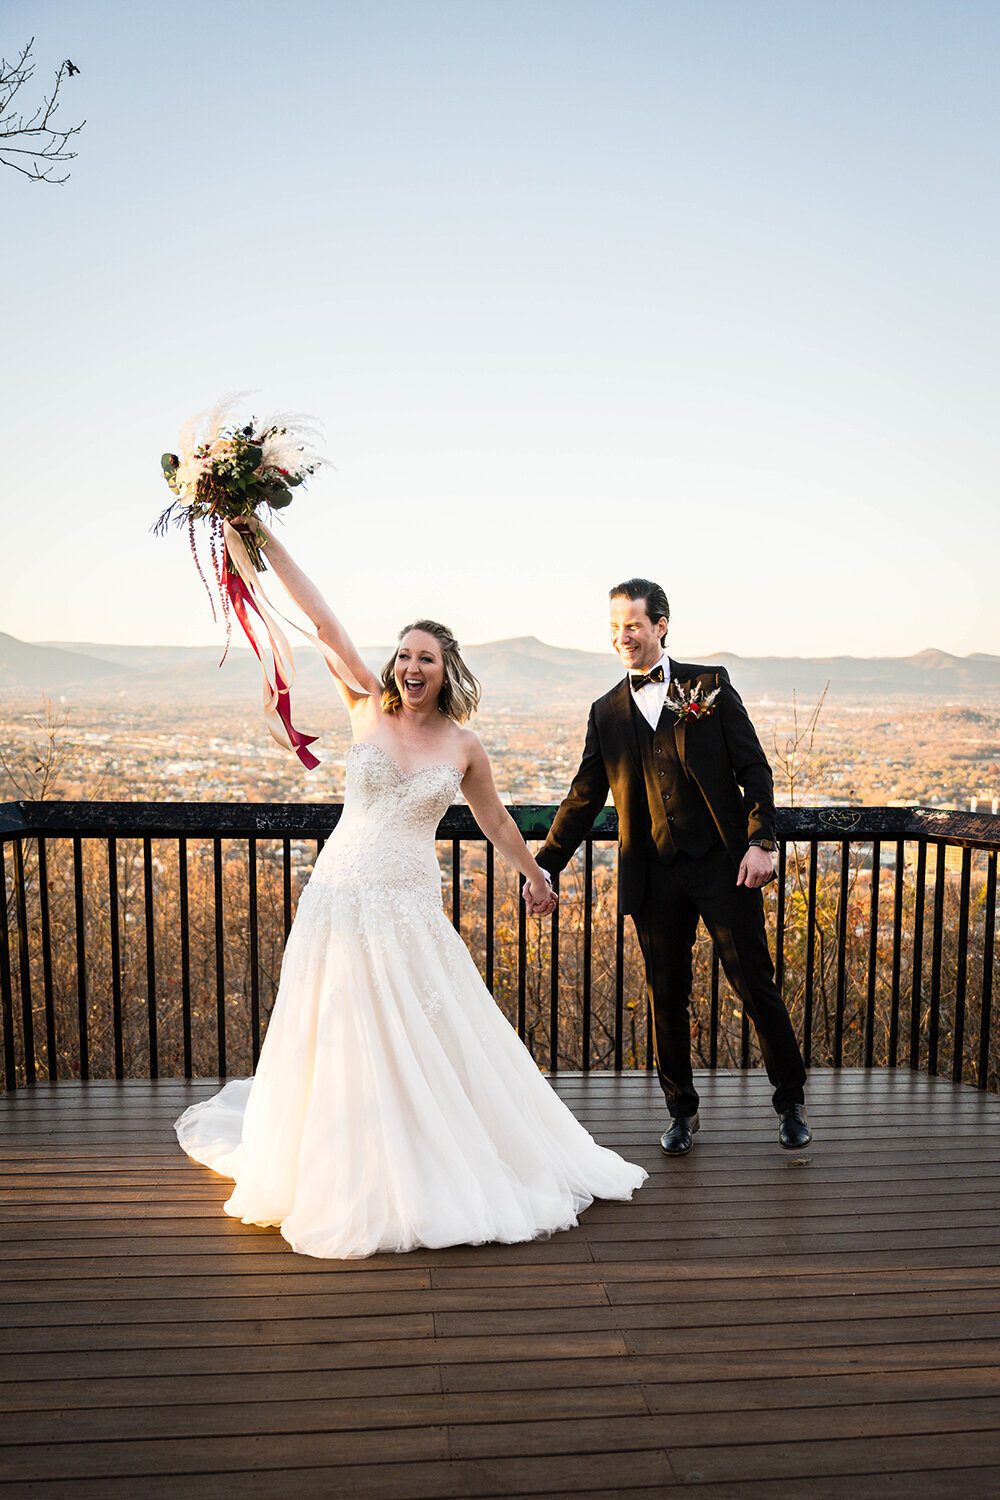 A newlywed couple holds hands on their elopement day for a portrait at the Rockledge Overlook at sunset in Roanoke, Virginia. The bride holds her bouquet in the air and has an excited expression on her face while the groom smiles widely.